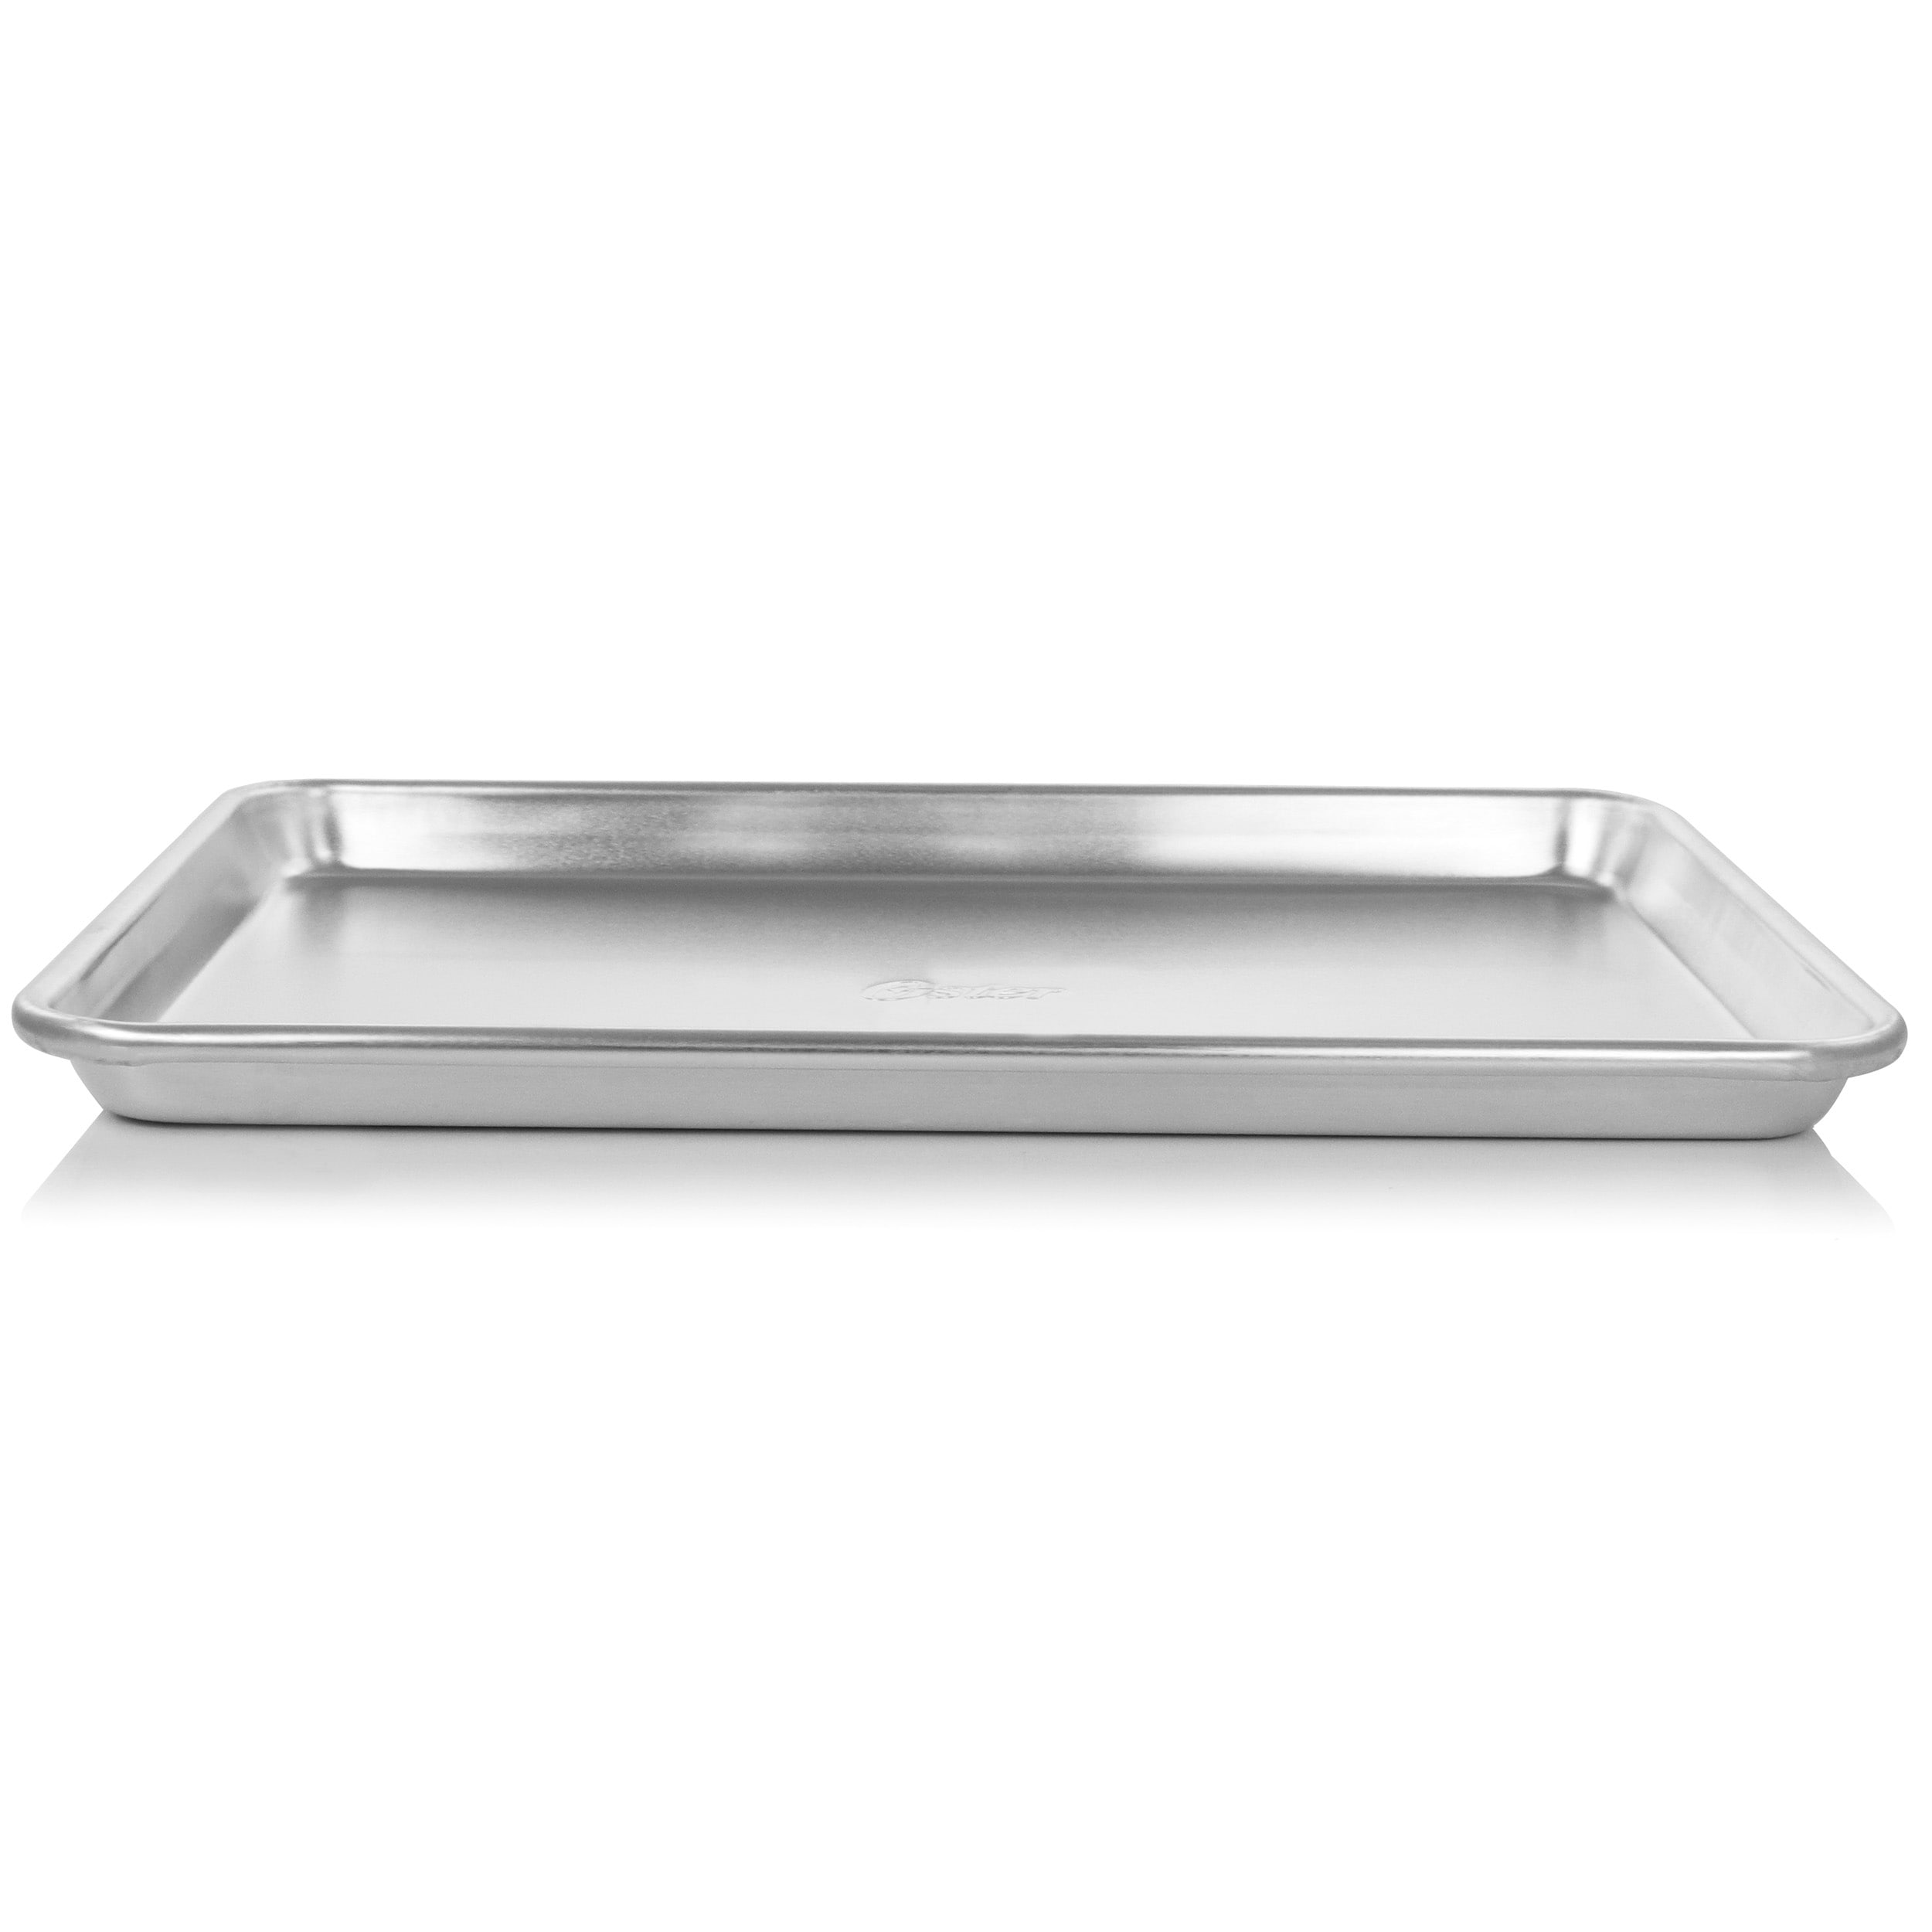 15 x 10.5 Inch Aluminum Jelly Roll Pan - On Sale - Bed Bath